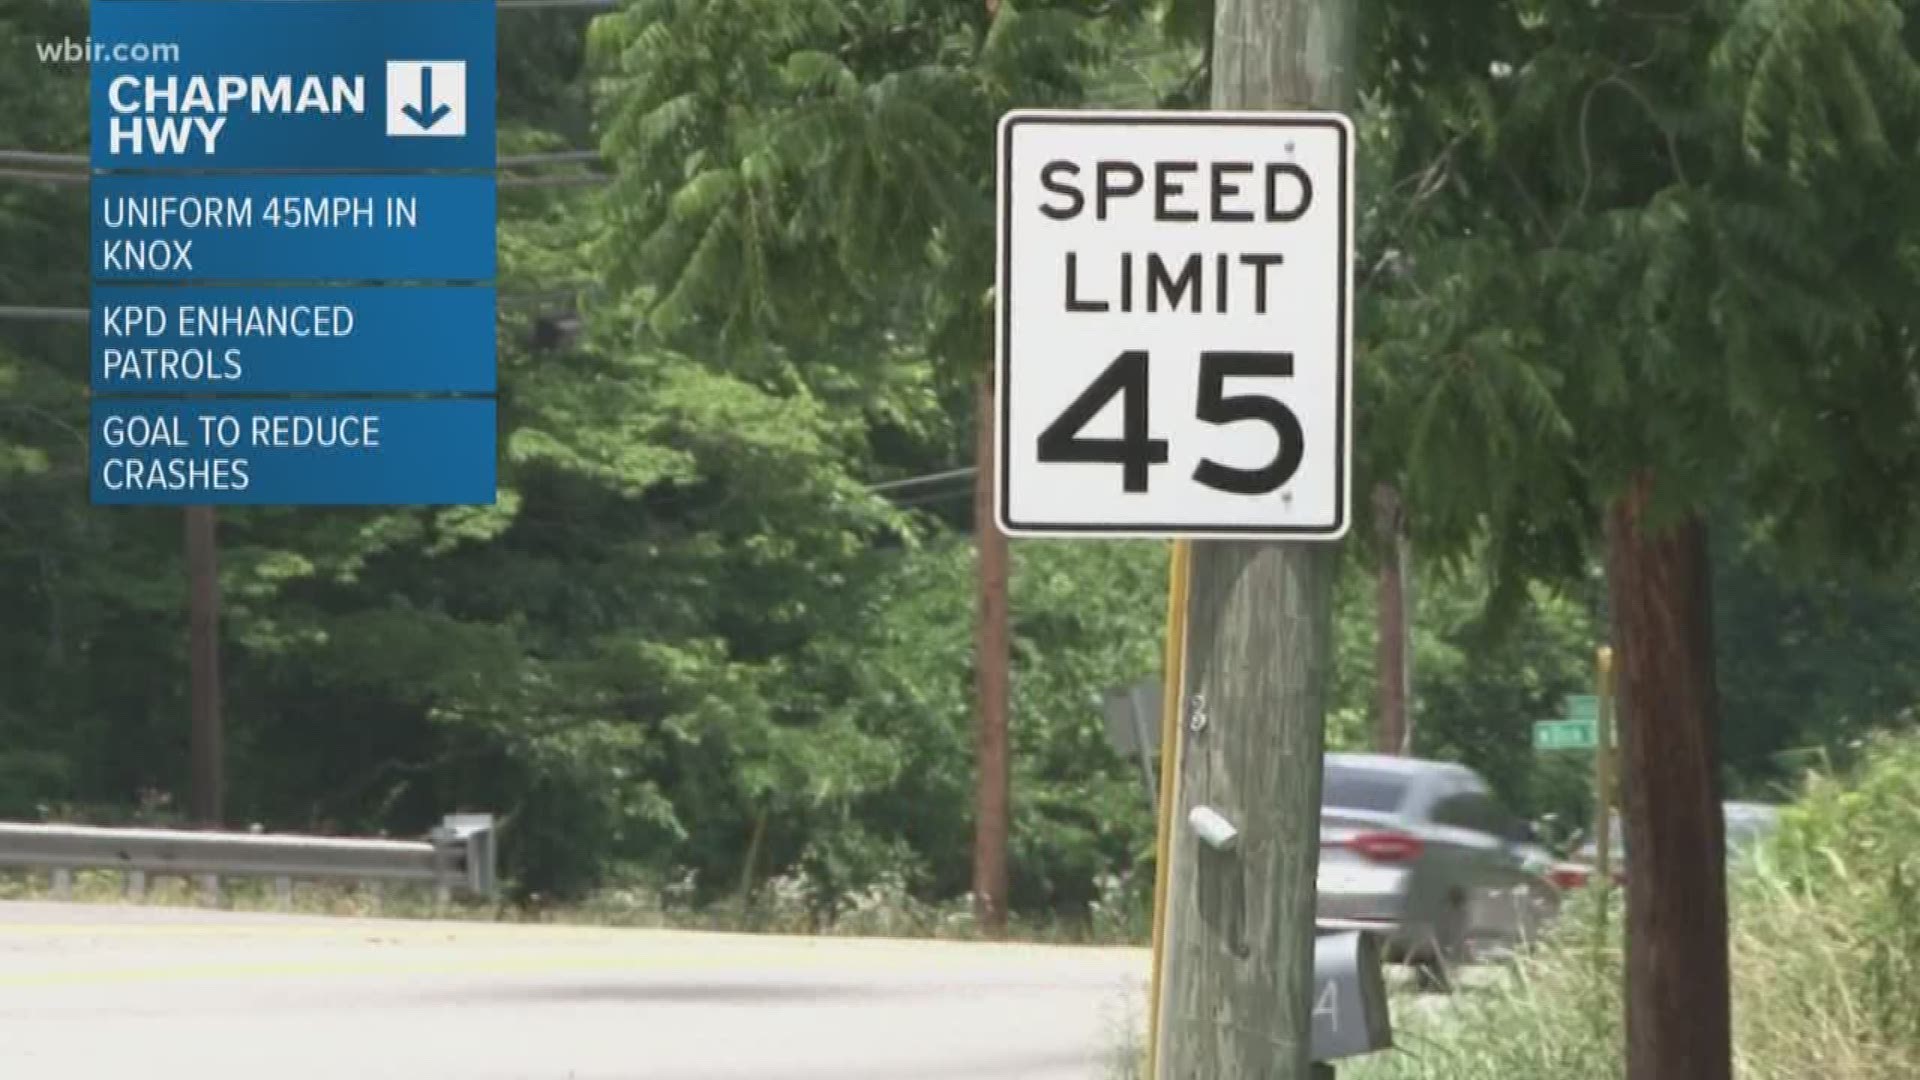 The City of Knoxville just lowered the speed limit on a stretch of Chapman Highway.